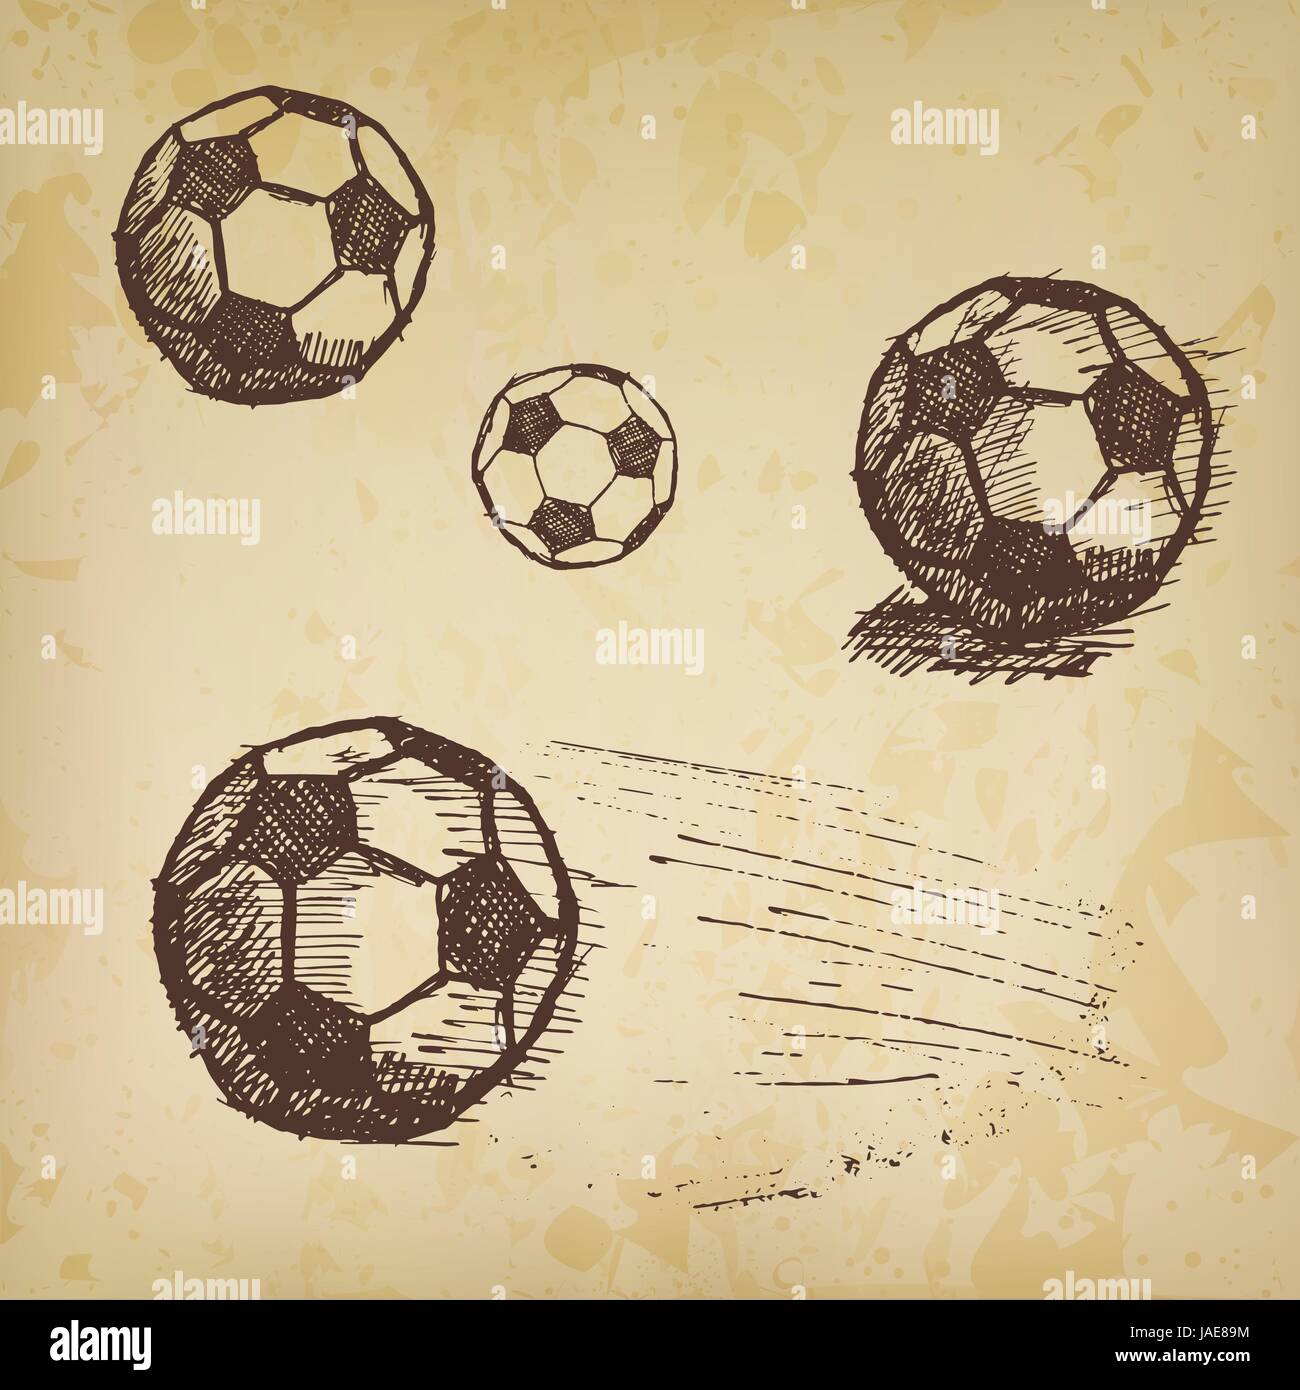 3 Ways to Draw a Soccer Ball  wikiHow